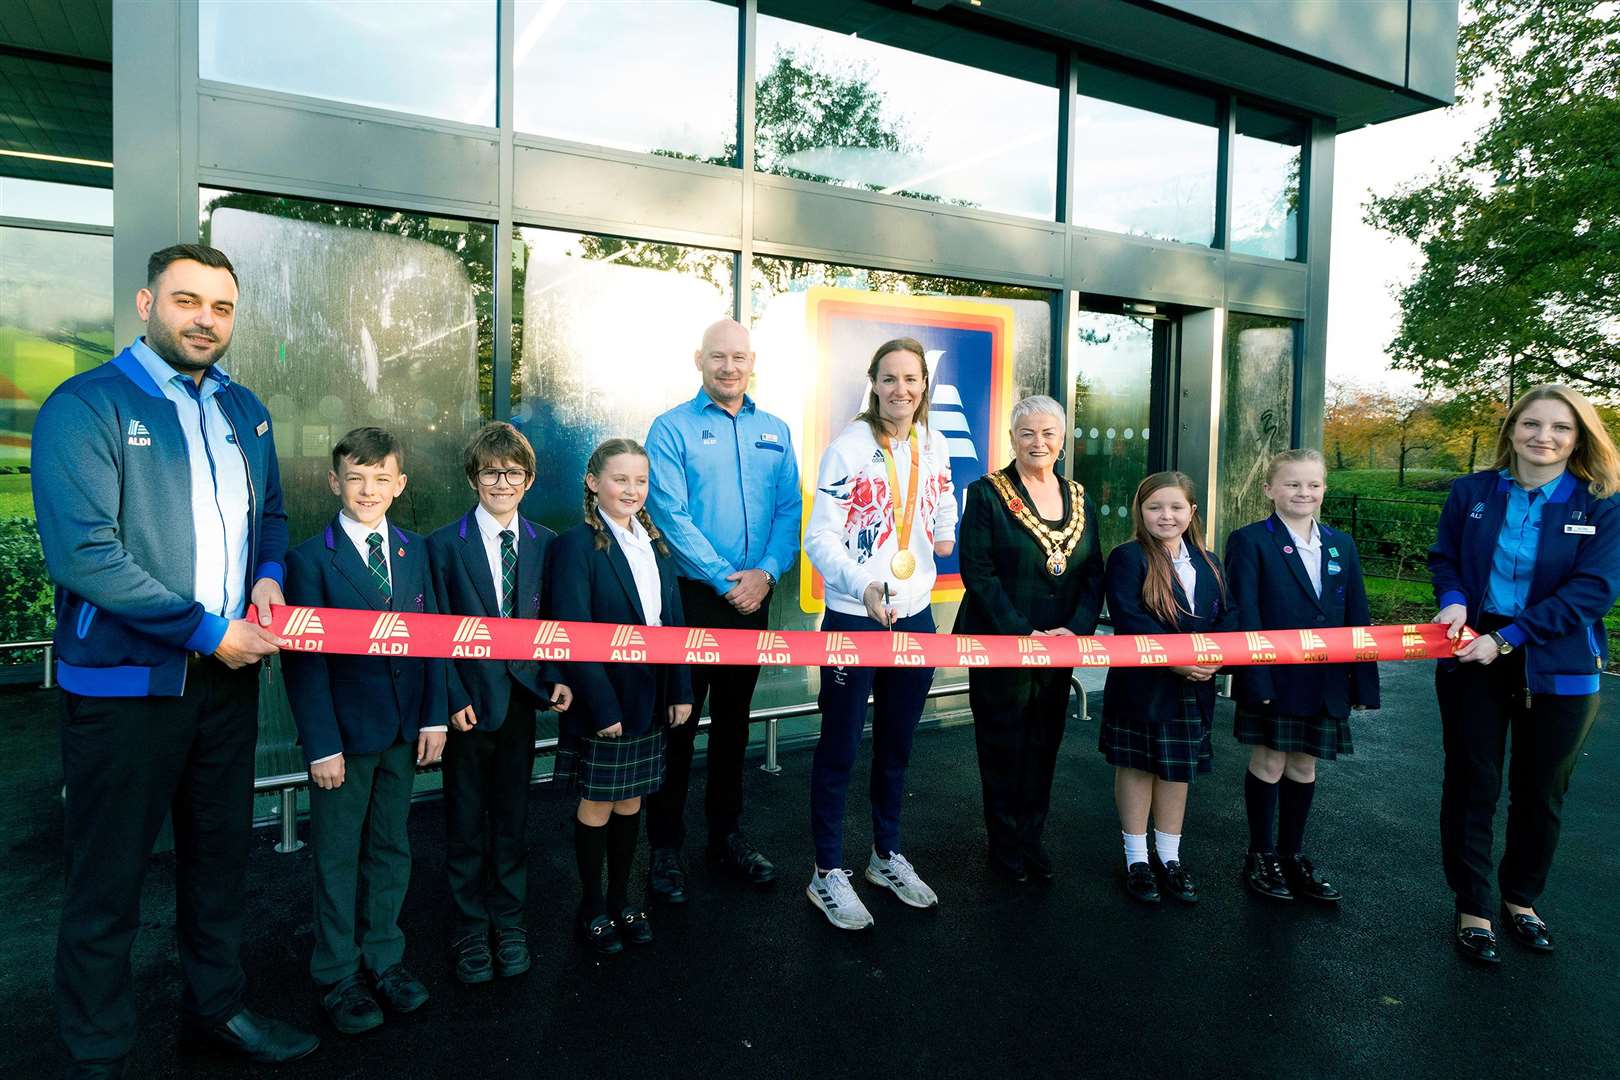 The opening of the store with staff, school children, store manager Lee Cowell, Paralympics GB Athlete Claire Cashmore and Sue Bell, Mayor of Tonbridge and Malling. Picture: McCann